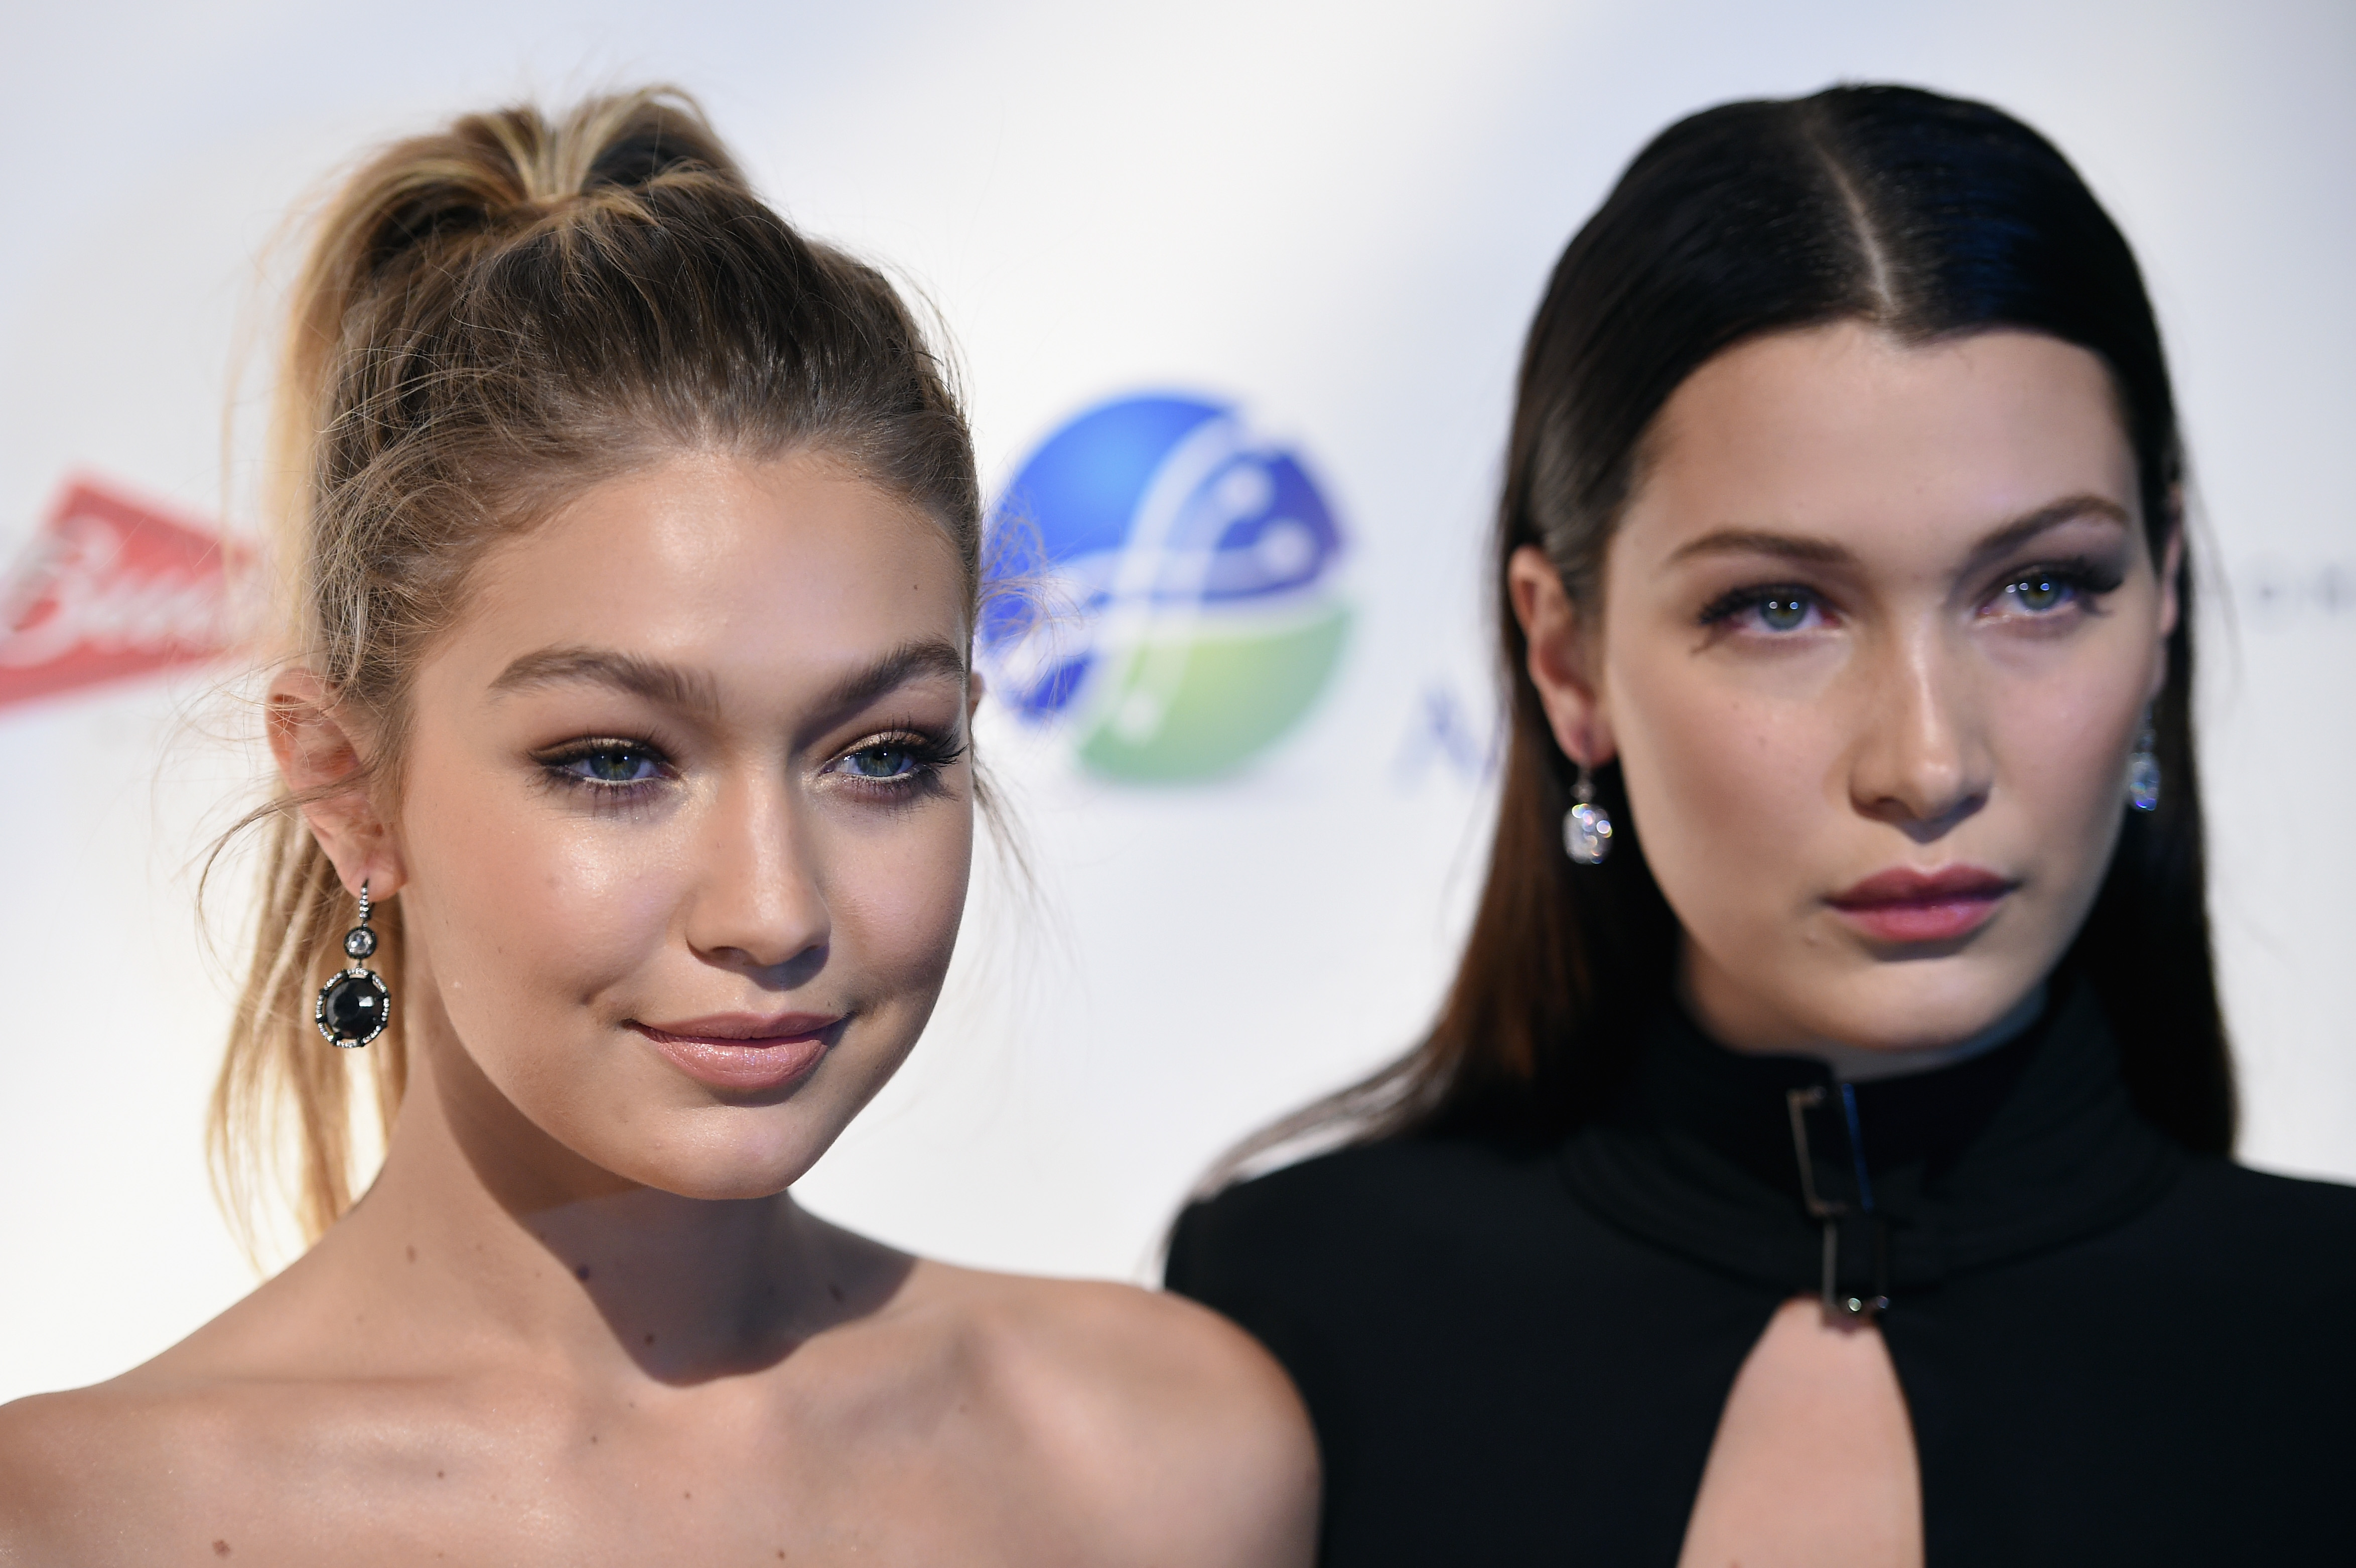 NEW YORK, NY - OCTOBER 08:  Gigi Hadid (L) and Bella Hadid attend the Global Lyme Alliance "Uniting for a Lyme-Free World" Inaugural Gala at Cipriani 42nd Street on October 8, 2015 in New York City.  (Photo by Dimitrios Kambouris/Getty Images for Global Lyme Alliance) (Dimitrios Kambouris—Getty Images for Global Lyme Alliance)